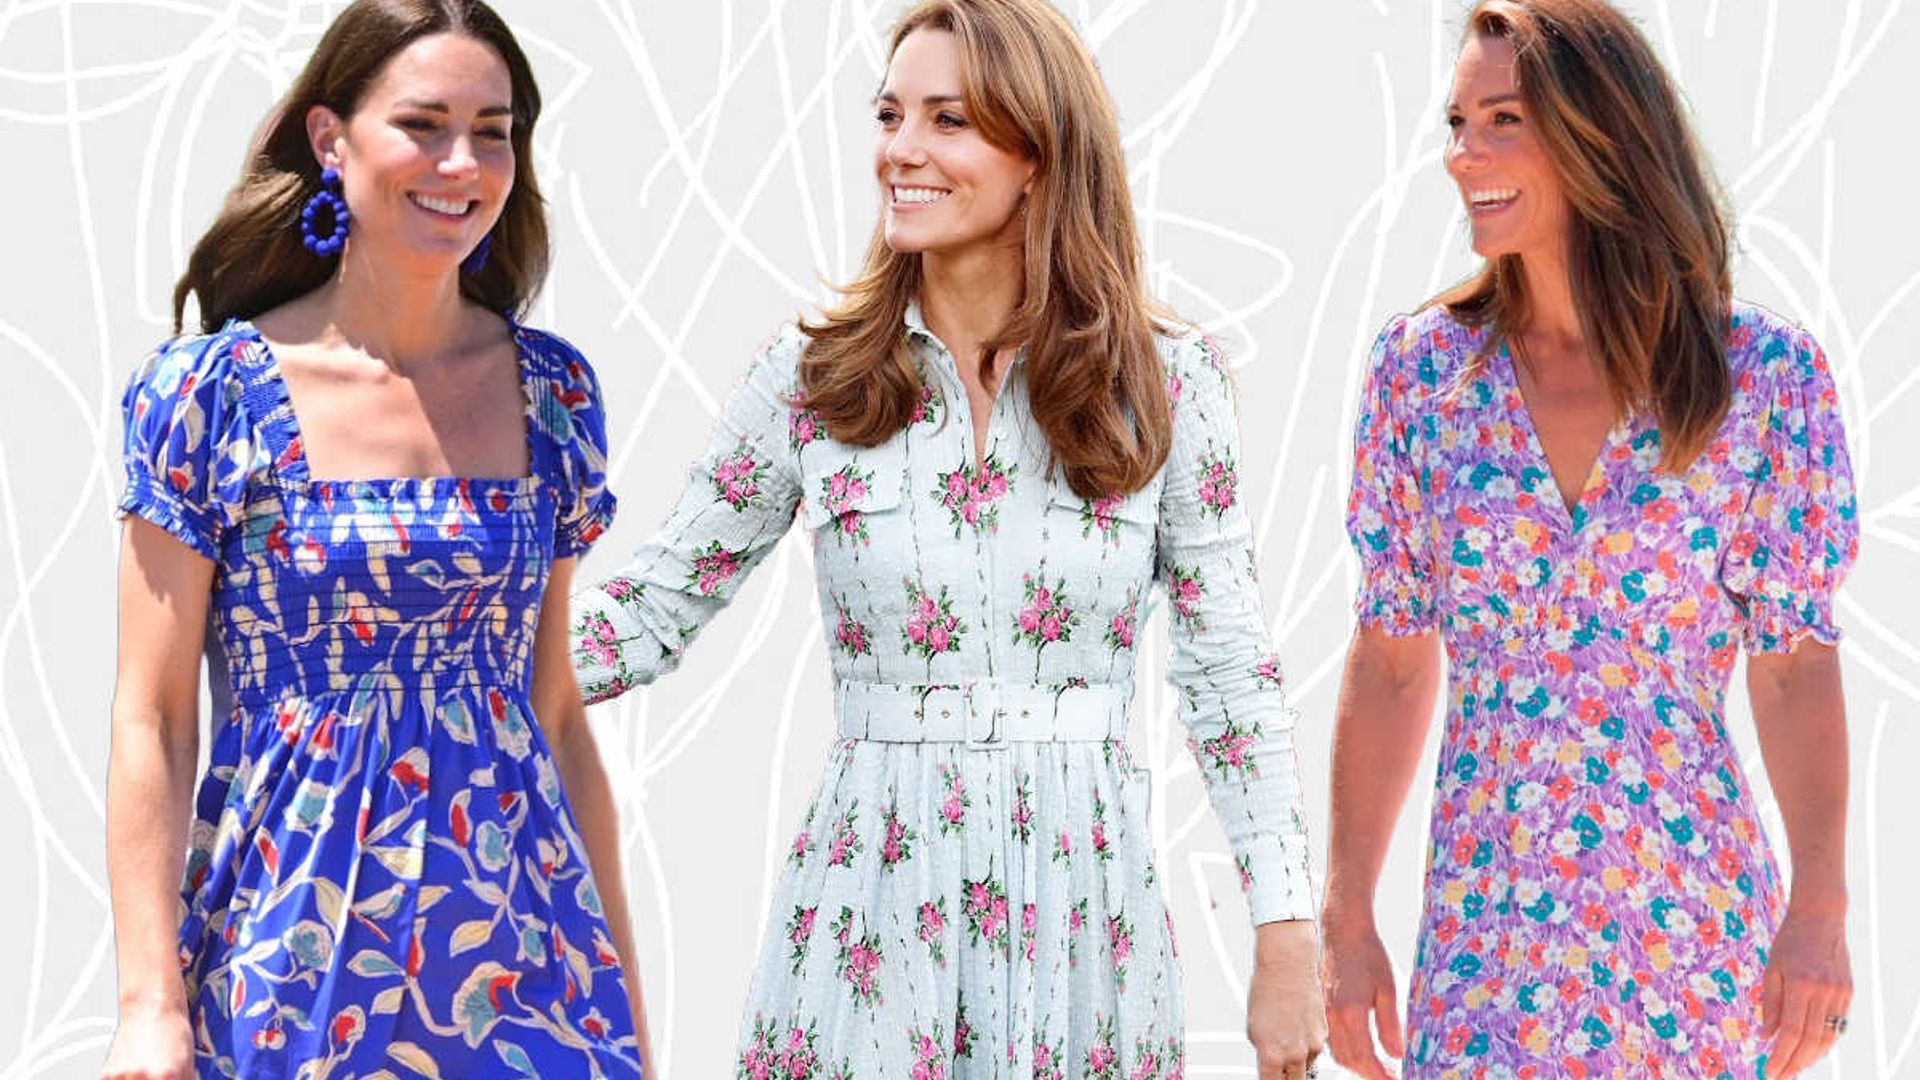 16 floral midi dresses Kate Middleton would love - and they're up to 75% off at Nordstrom Rack